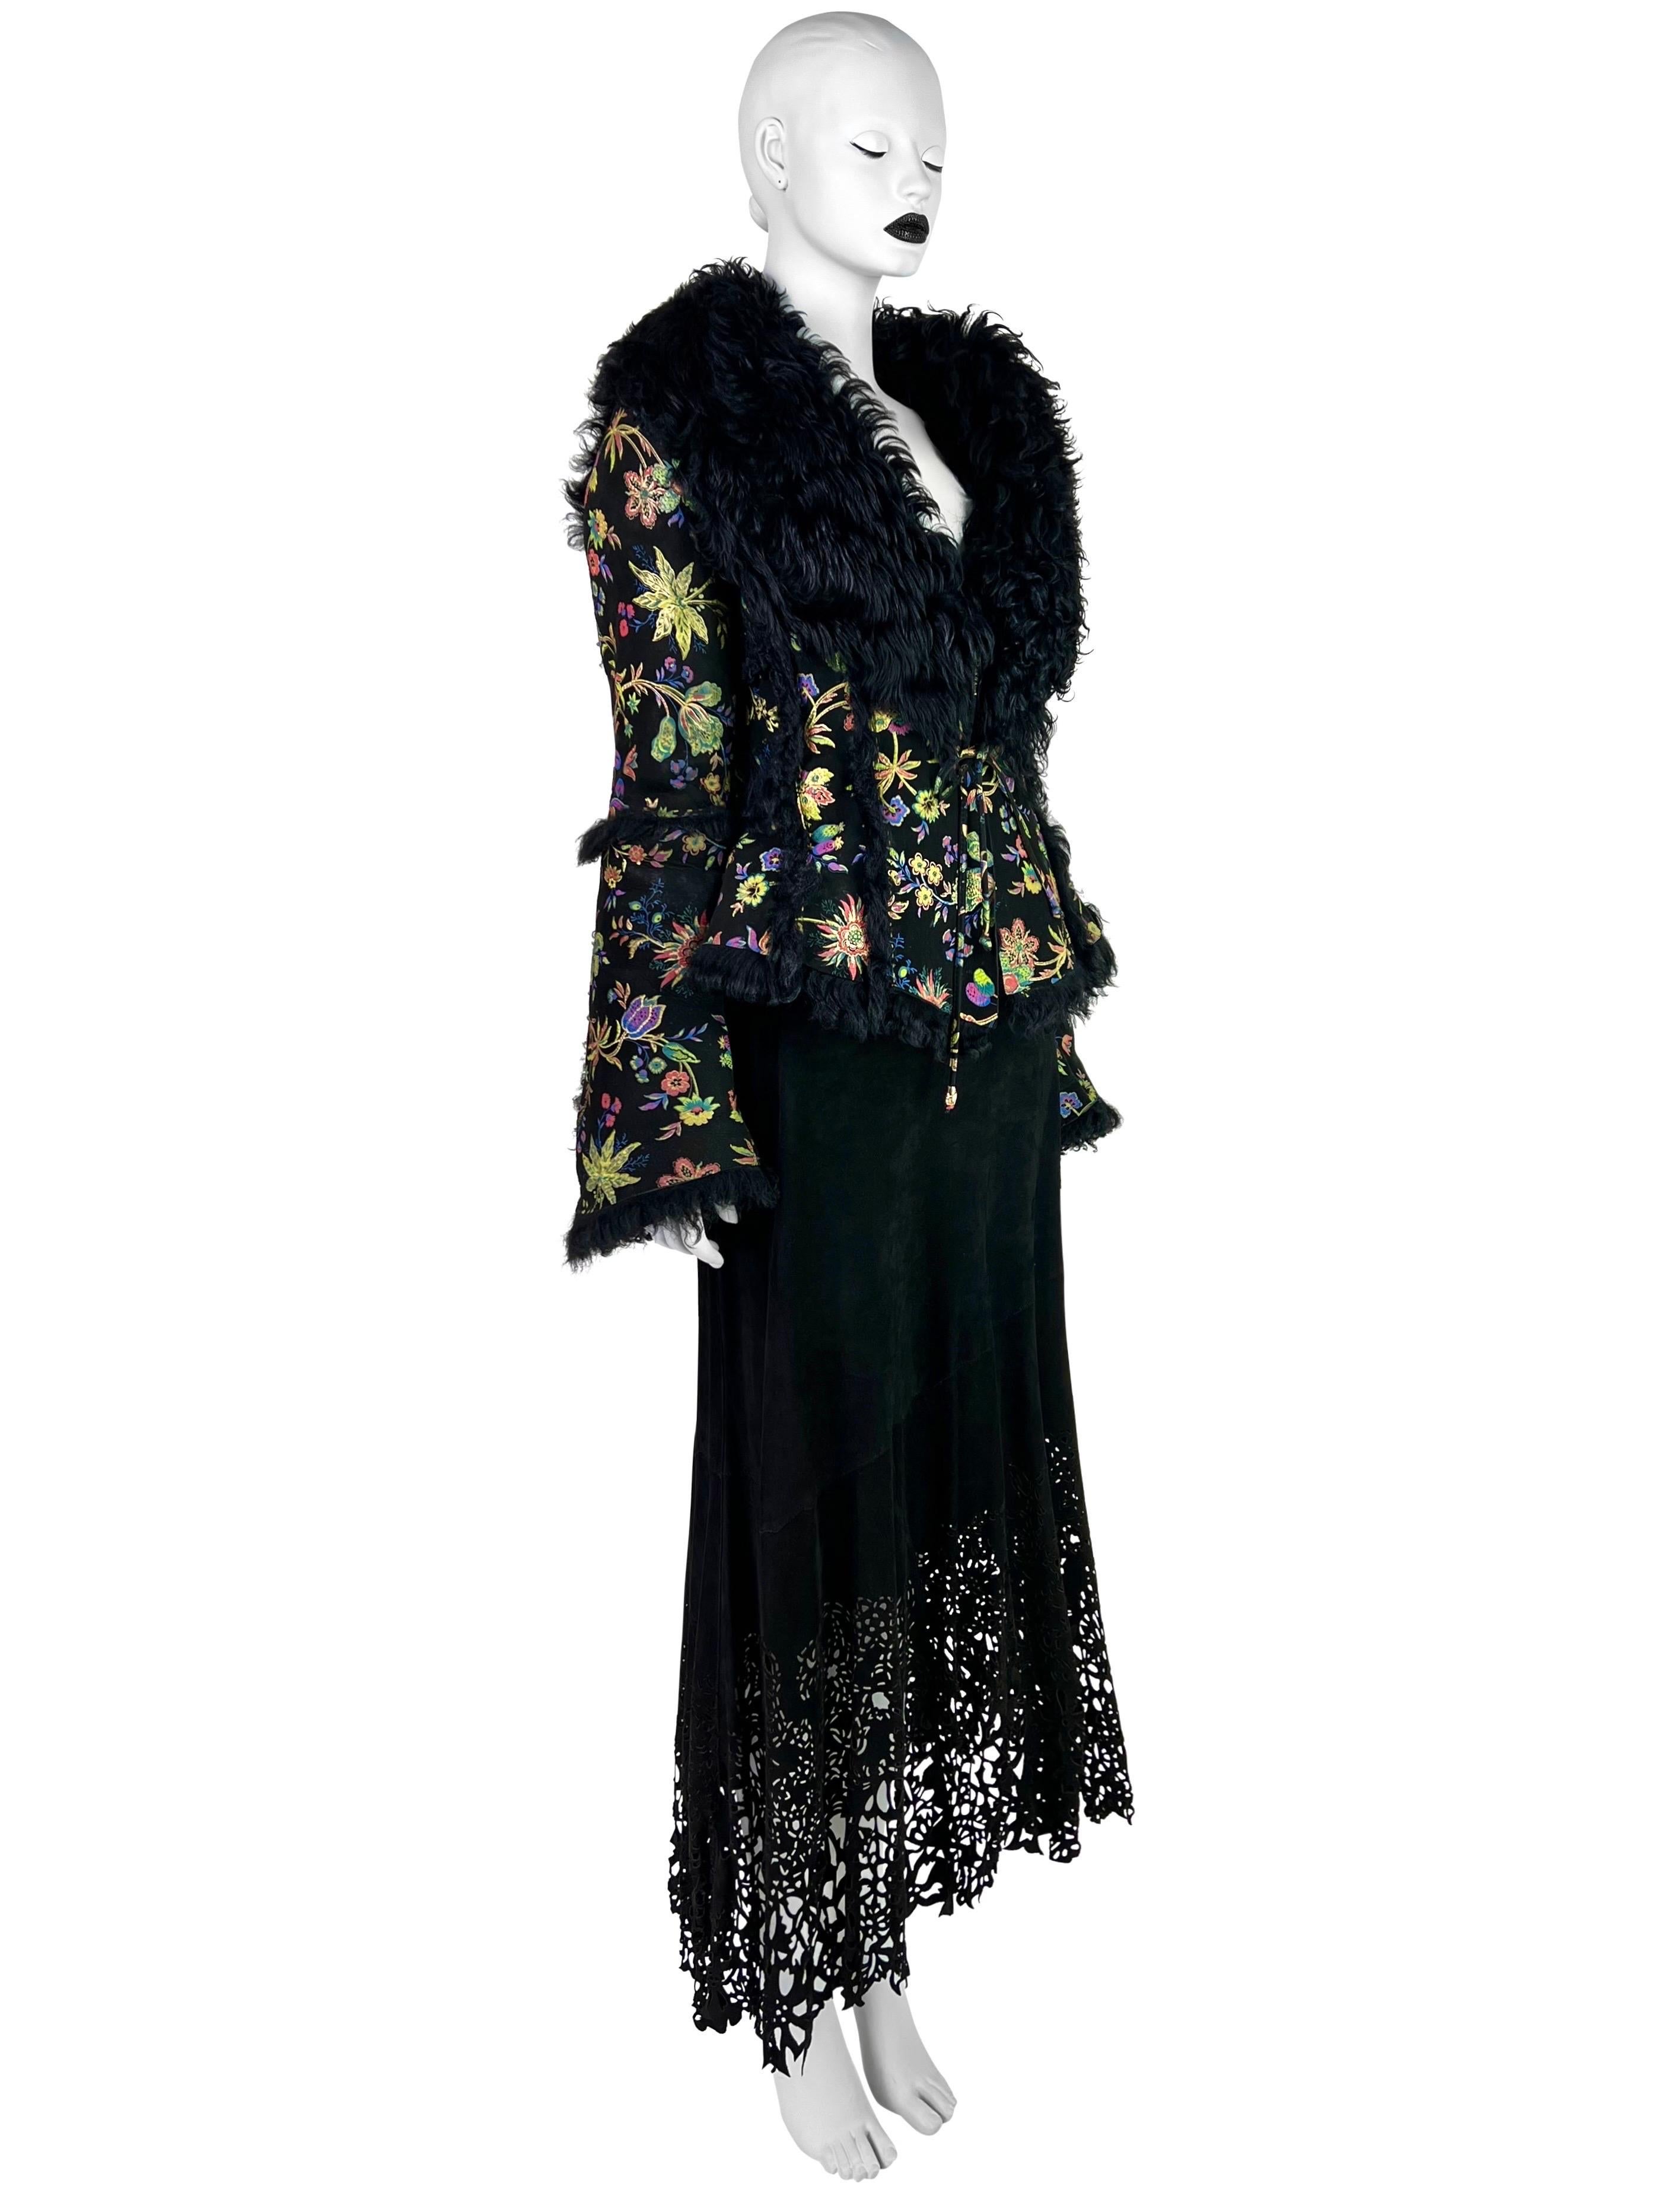 Women's Roberto Cavalli Fall 1999 Hand-painted Flower Shearling Jacket For Sale